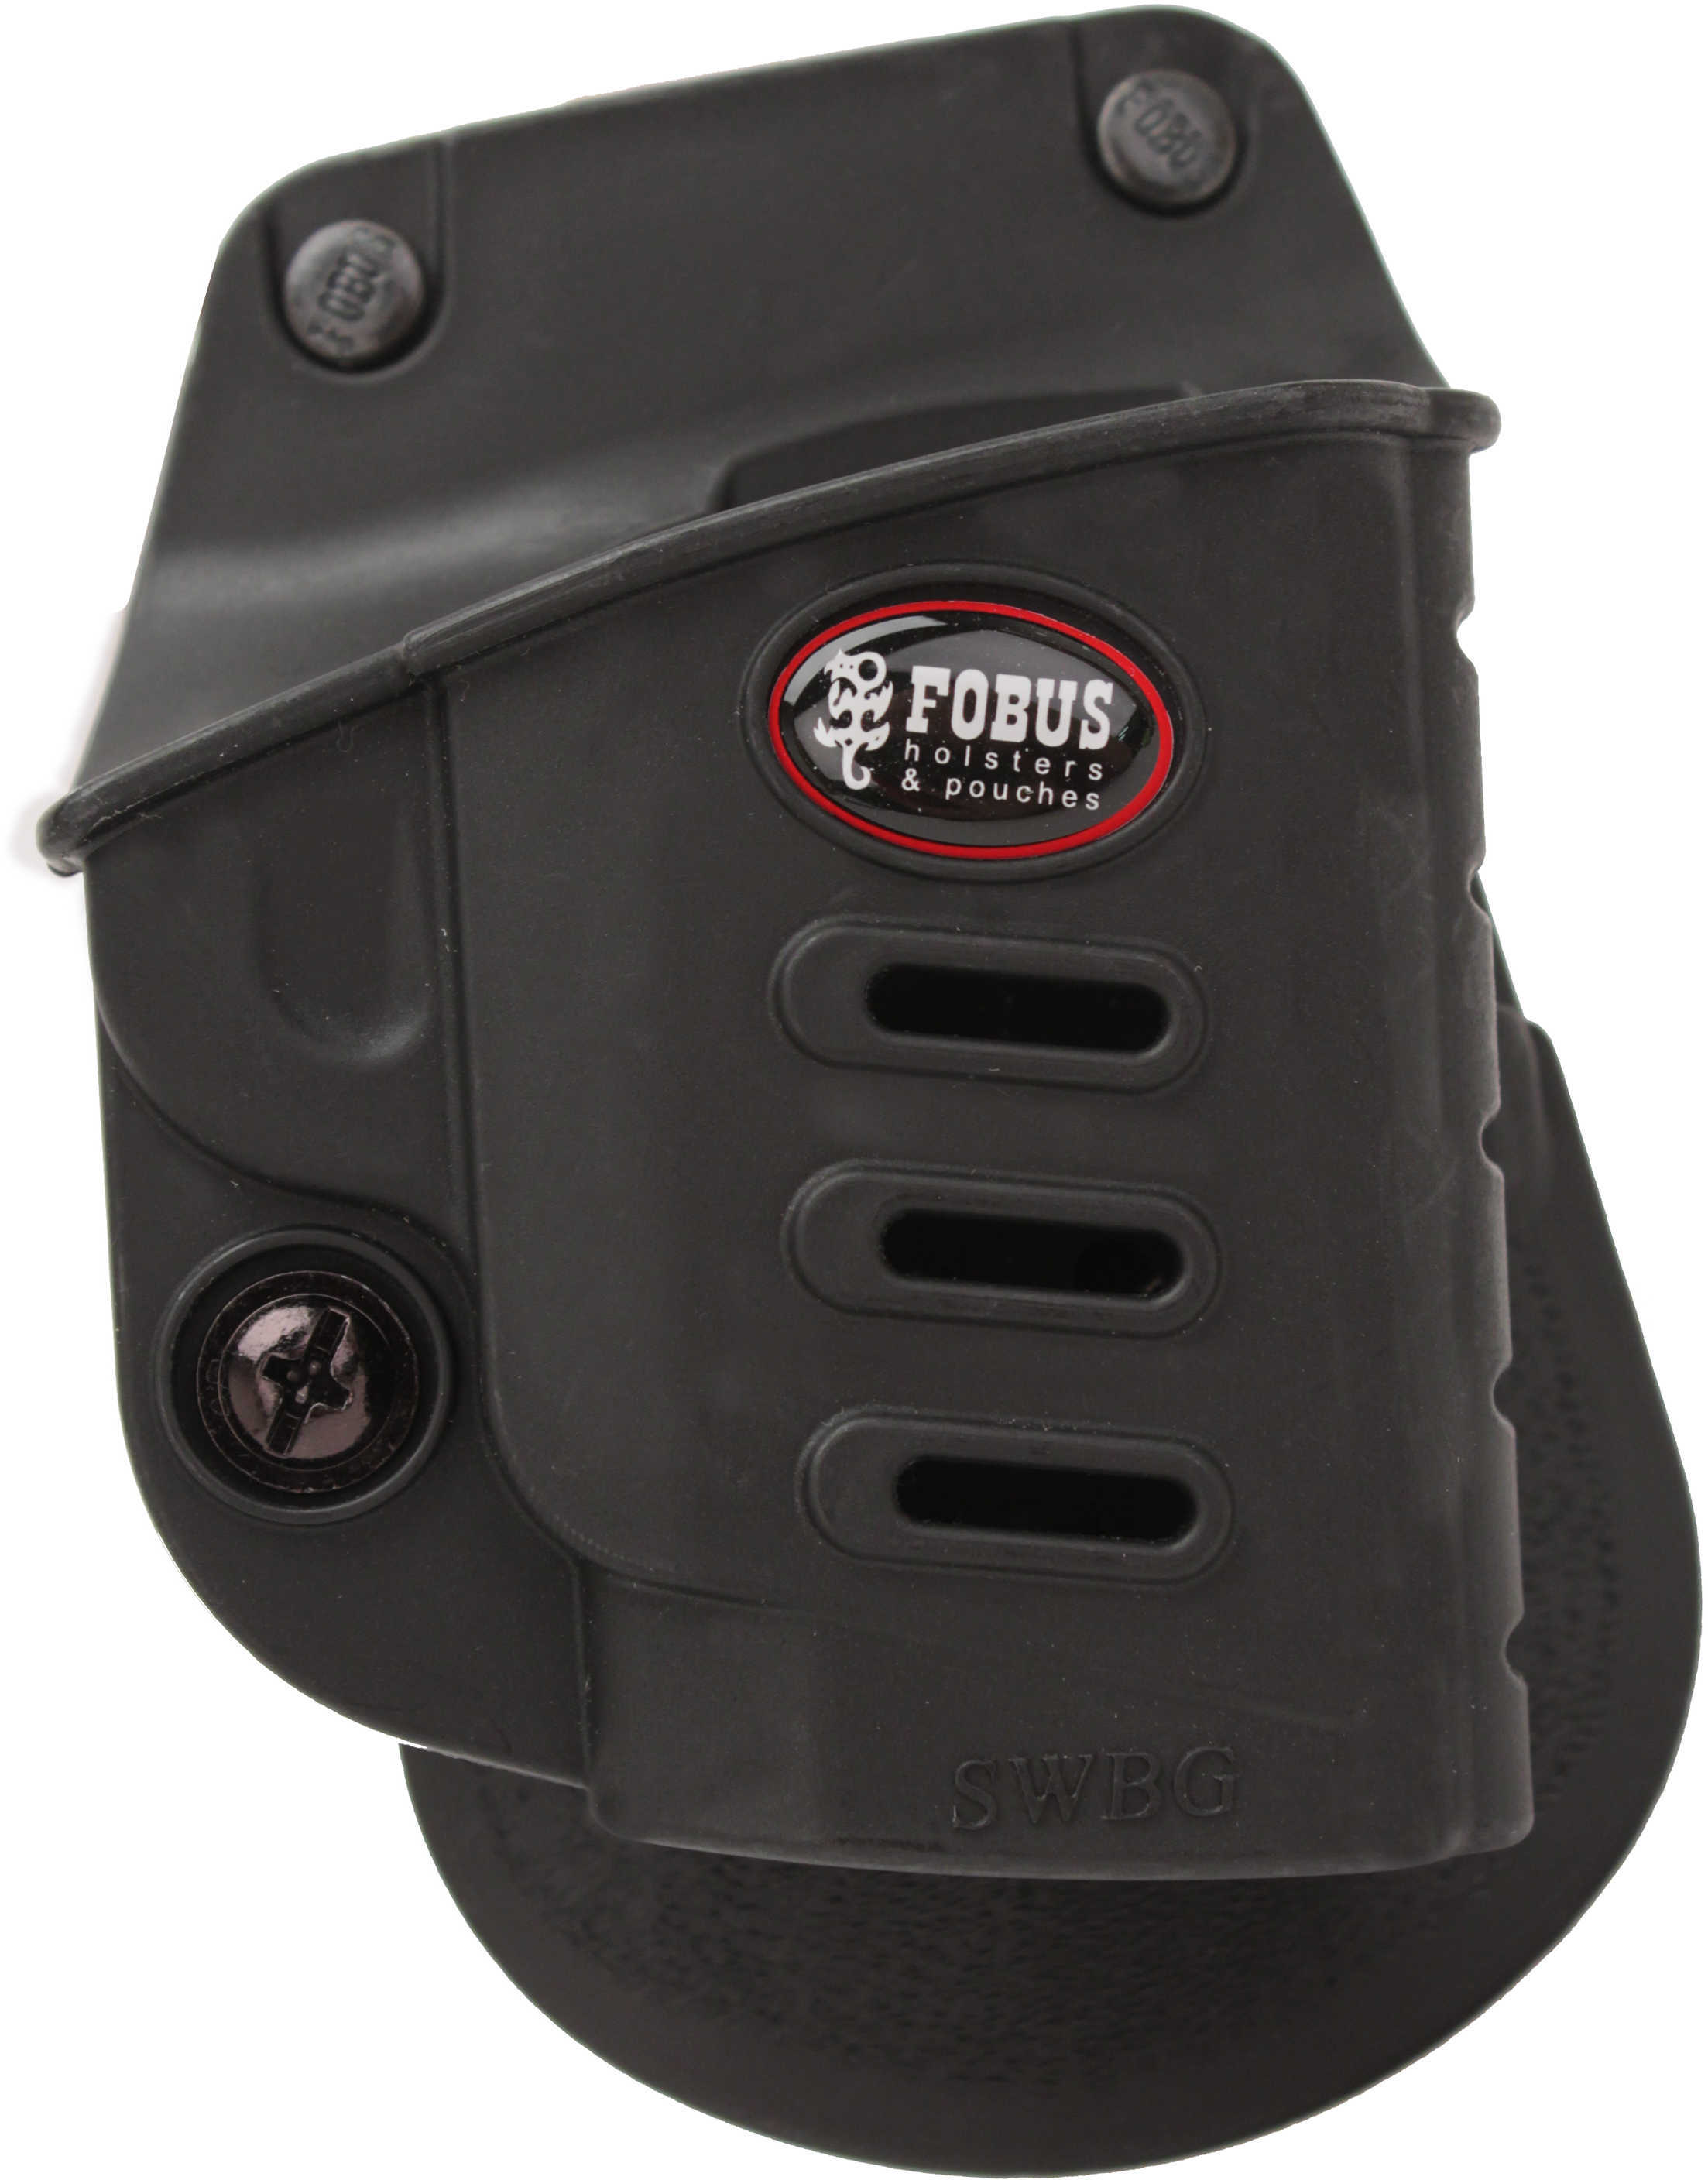 Fobus Holster E2 Paddle For S&W Body Guard .380